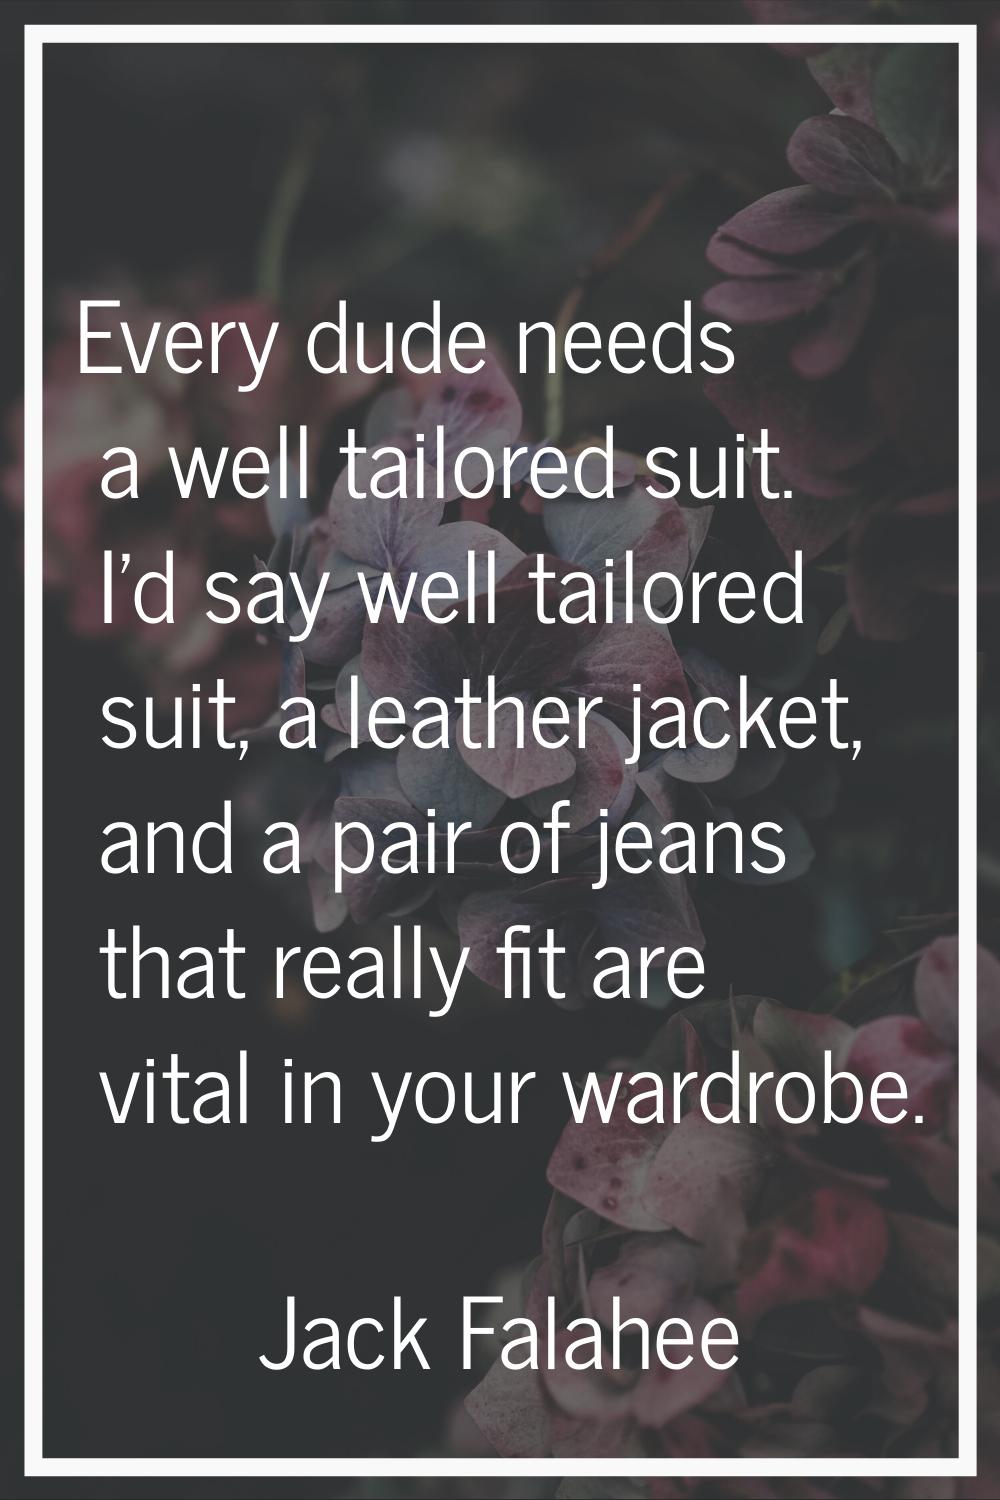 Every dude needs a well tailored suit. I'd say well tailored suit, a leather jacket, and a pair of 